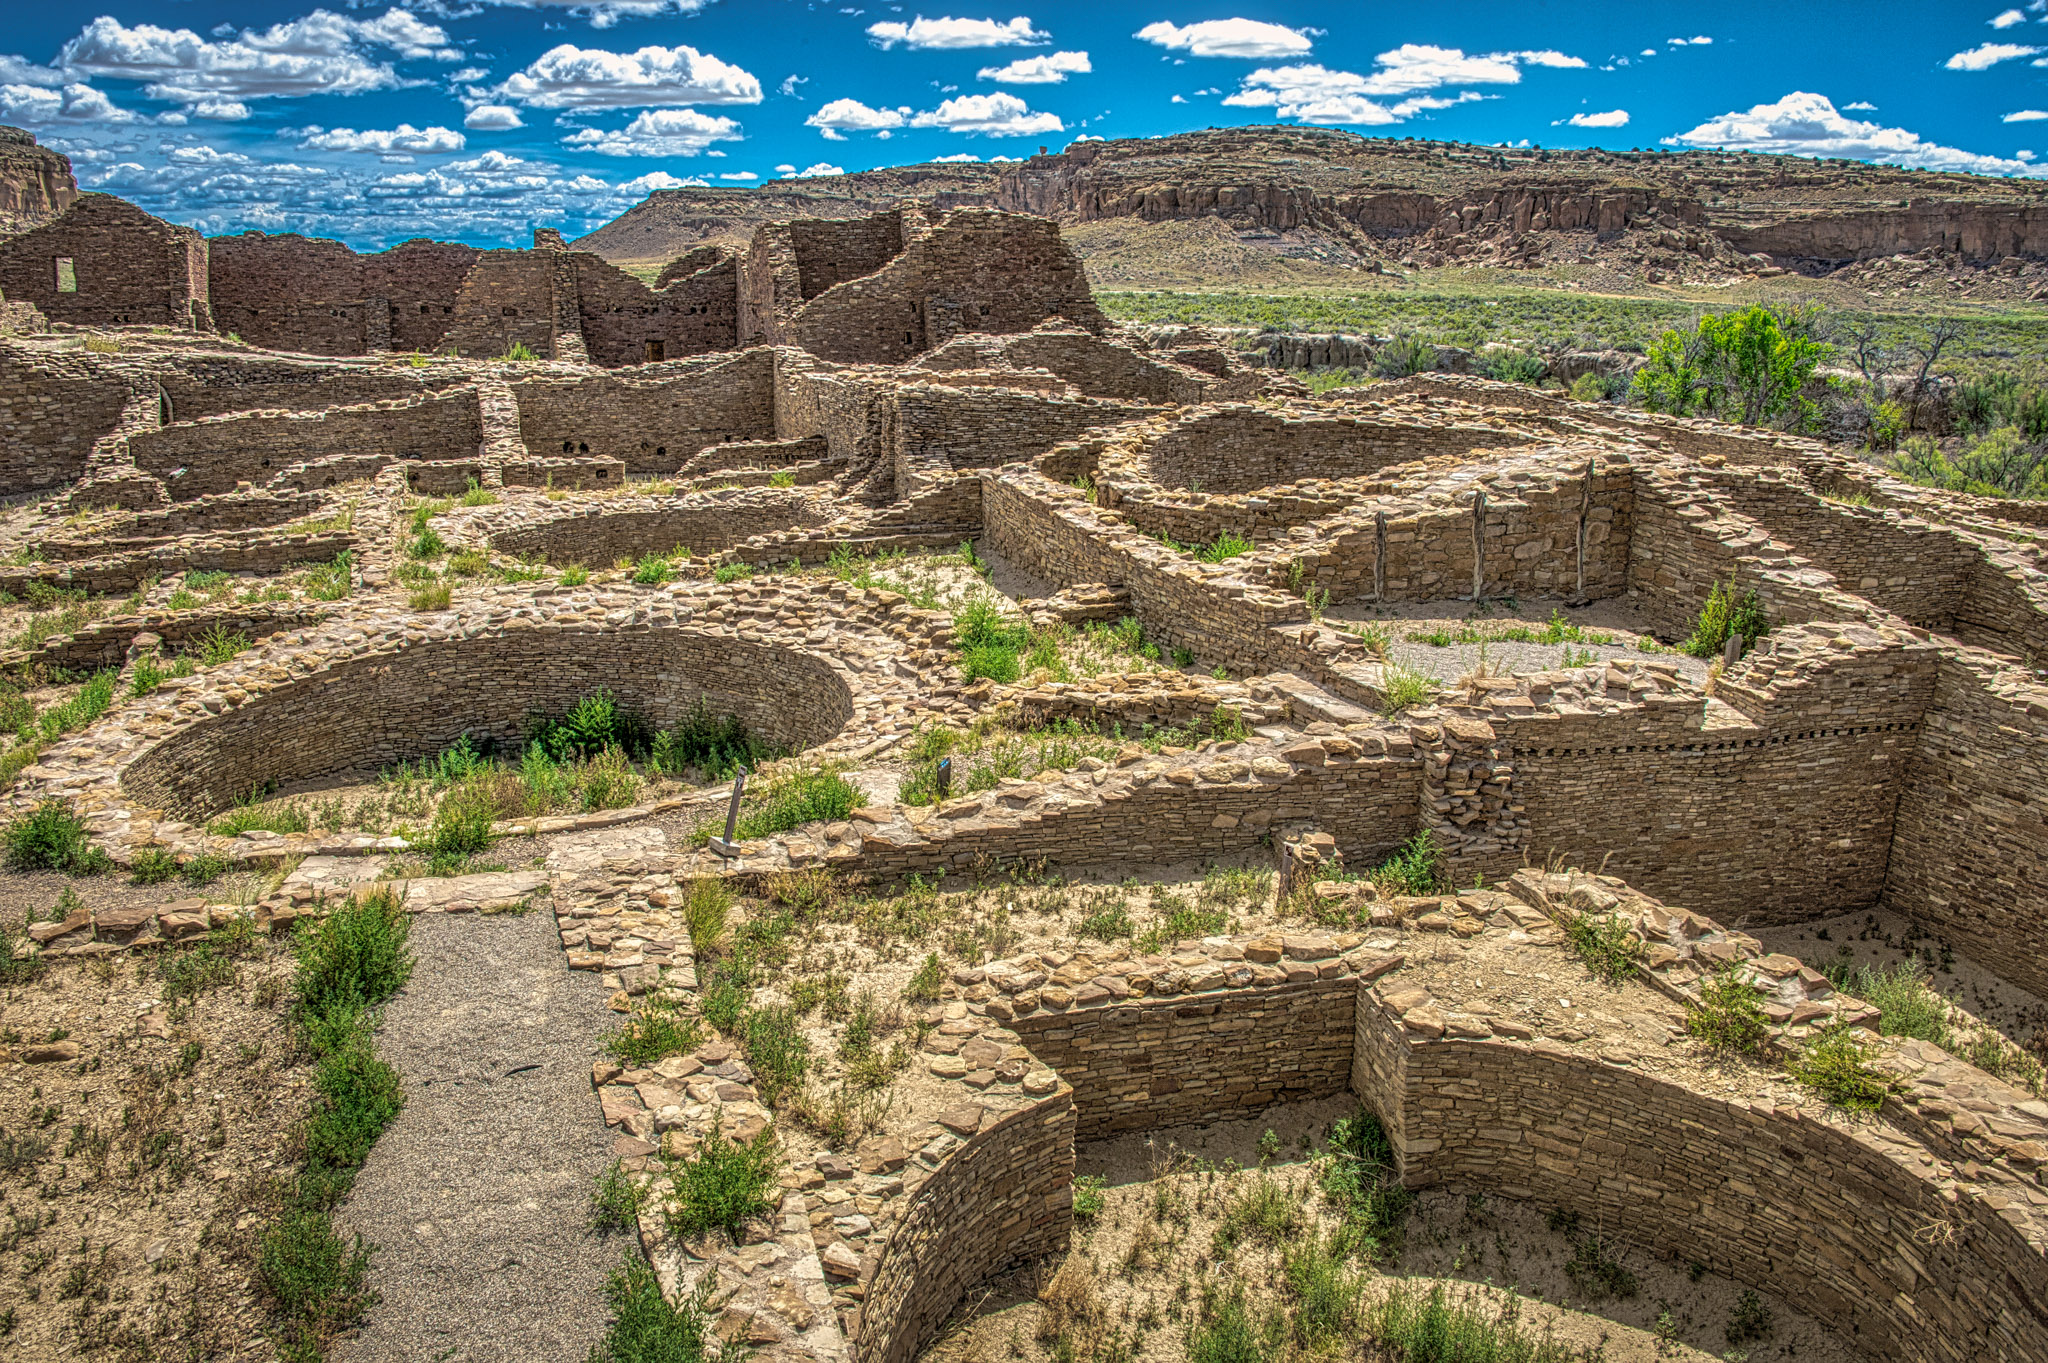 This interior view of Pueblo del Arroyo, in Chaco Canyon, New Mexico, shows several kivas, a multi-storied greathouse, and remnants of vigas.